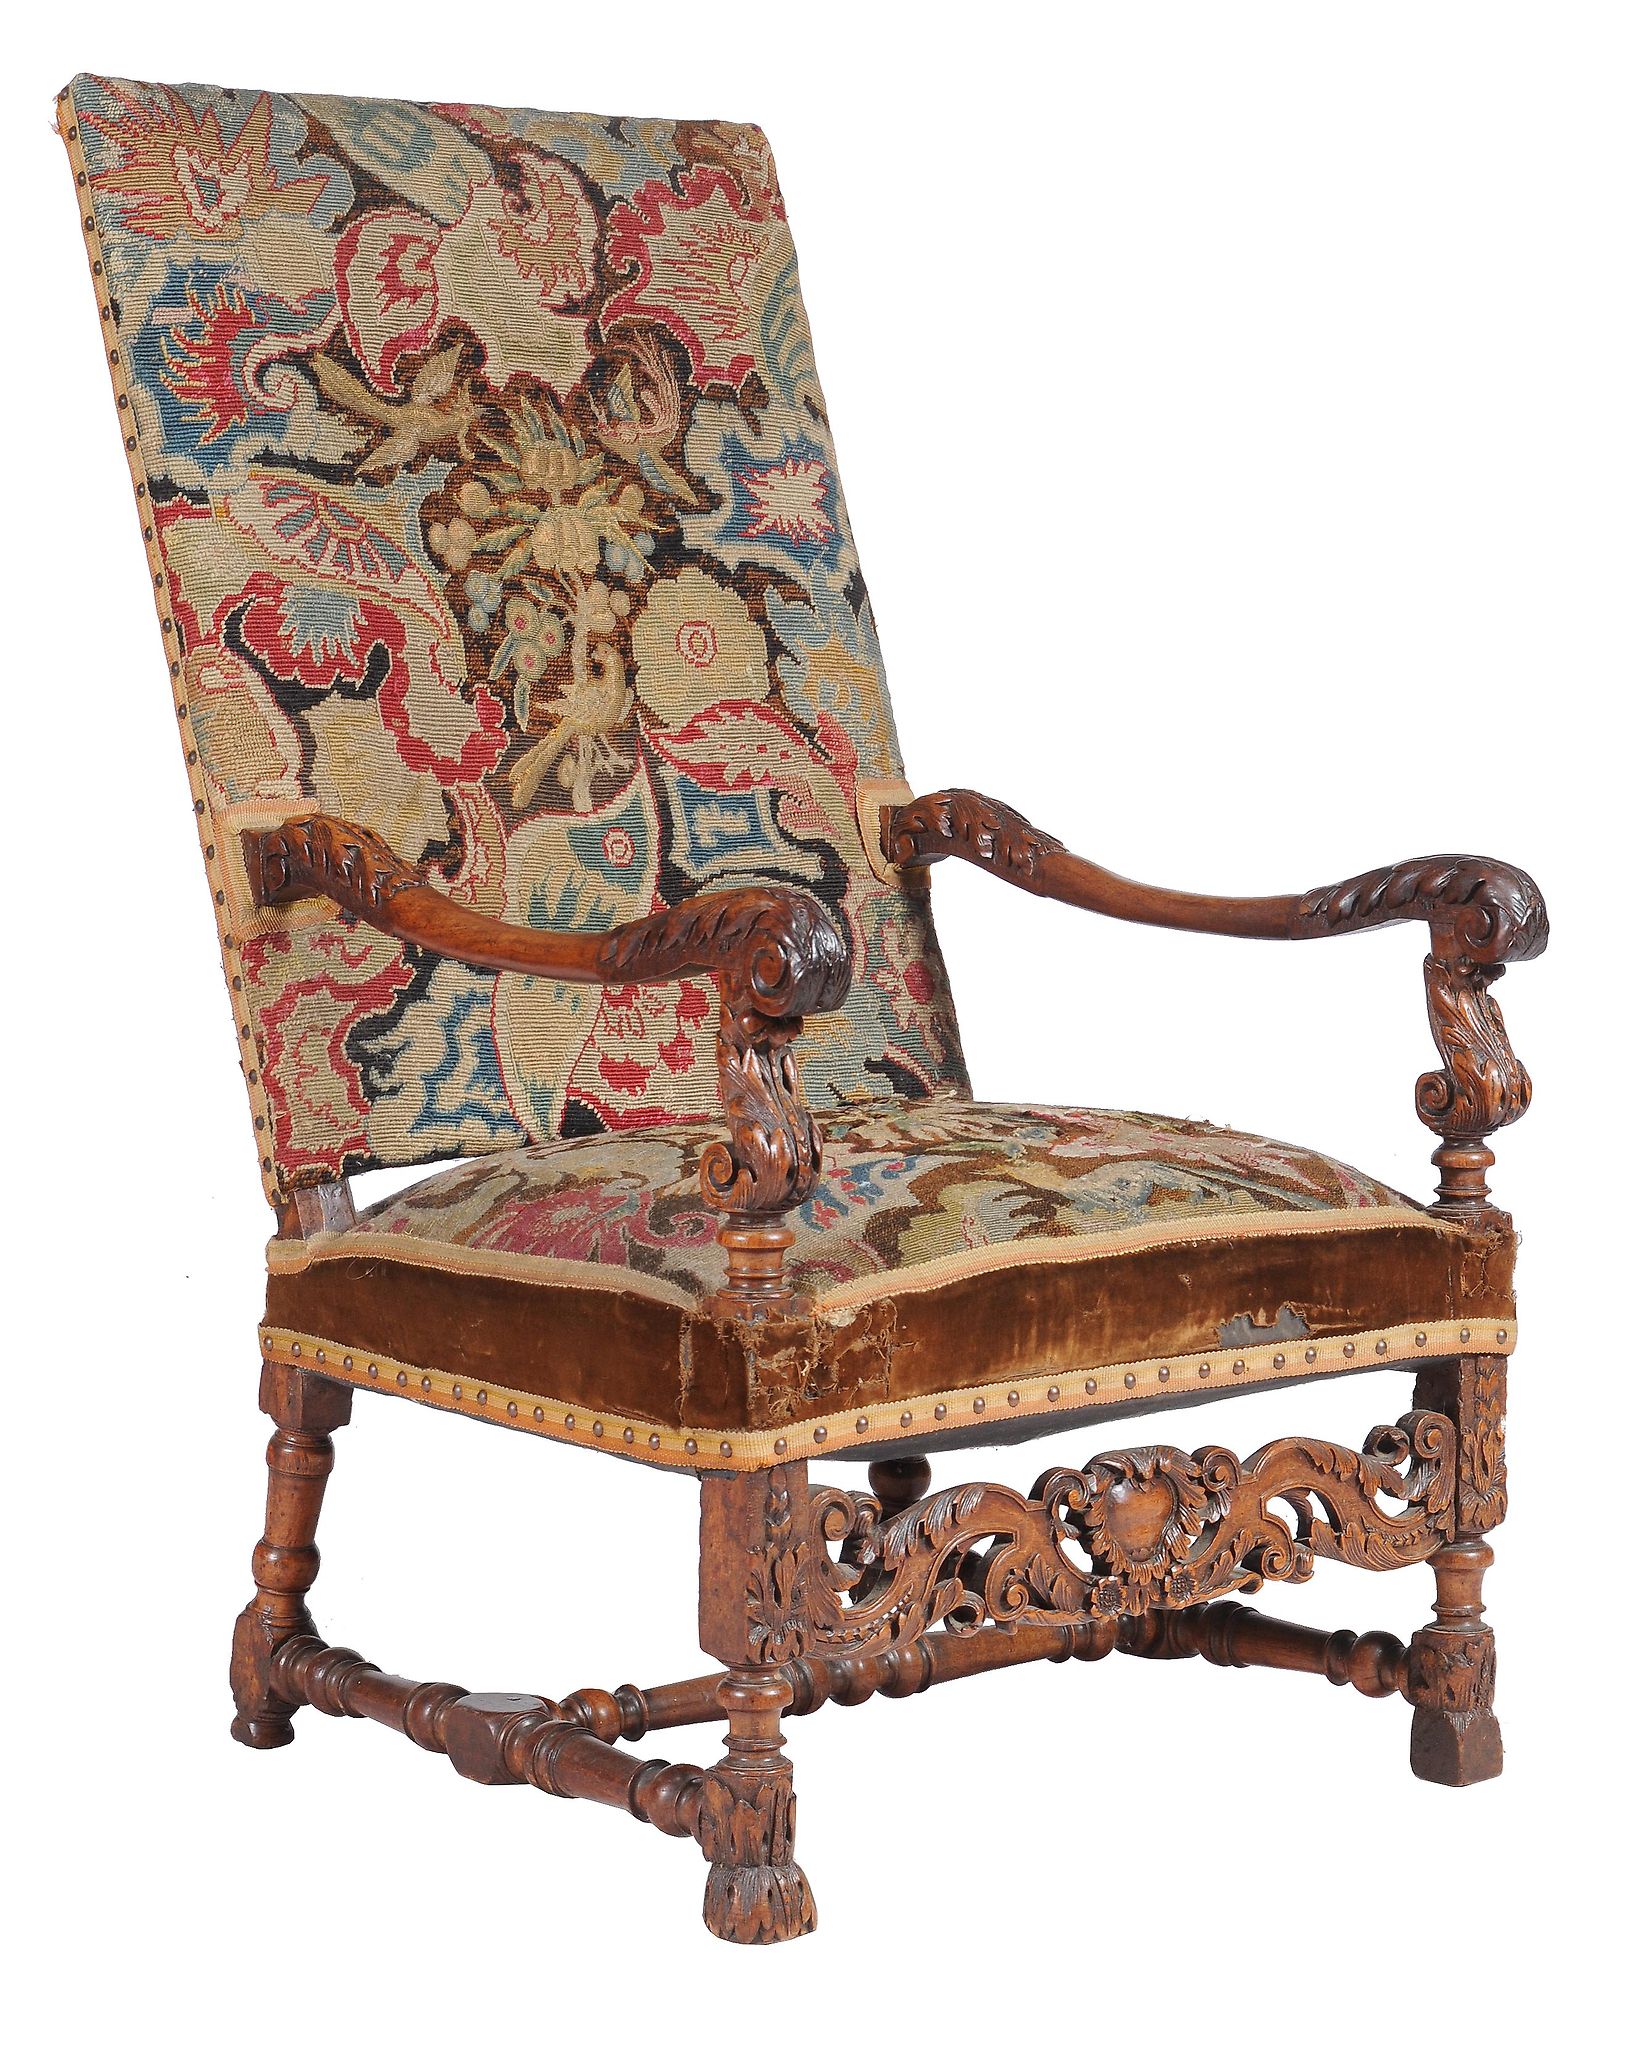 A Louis XIV carved walnut armchair, late 17th/ early 18th century, the rectangular back and seat